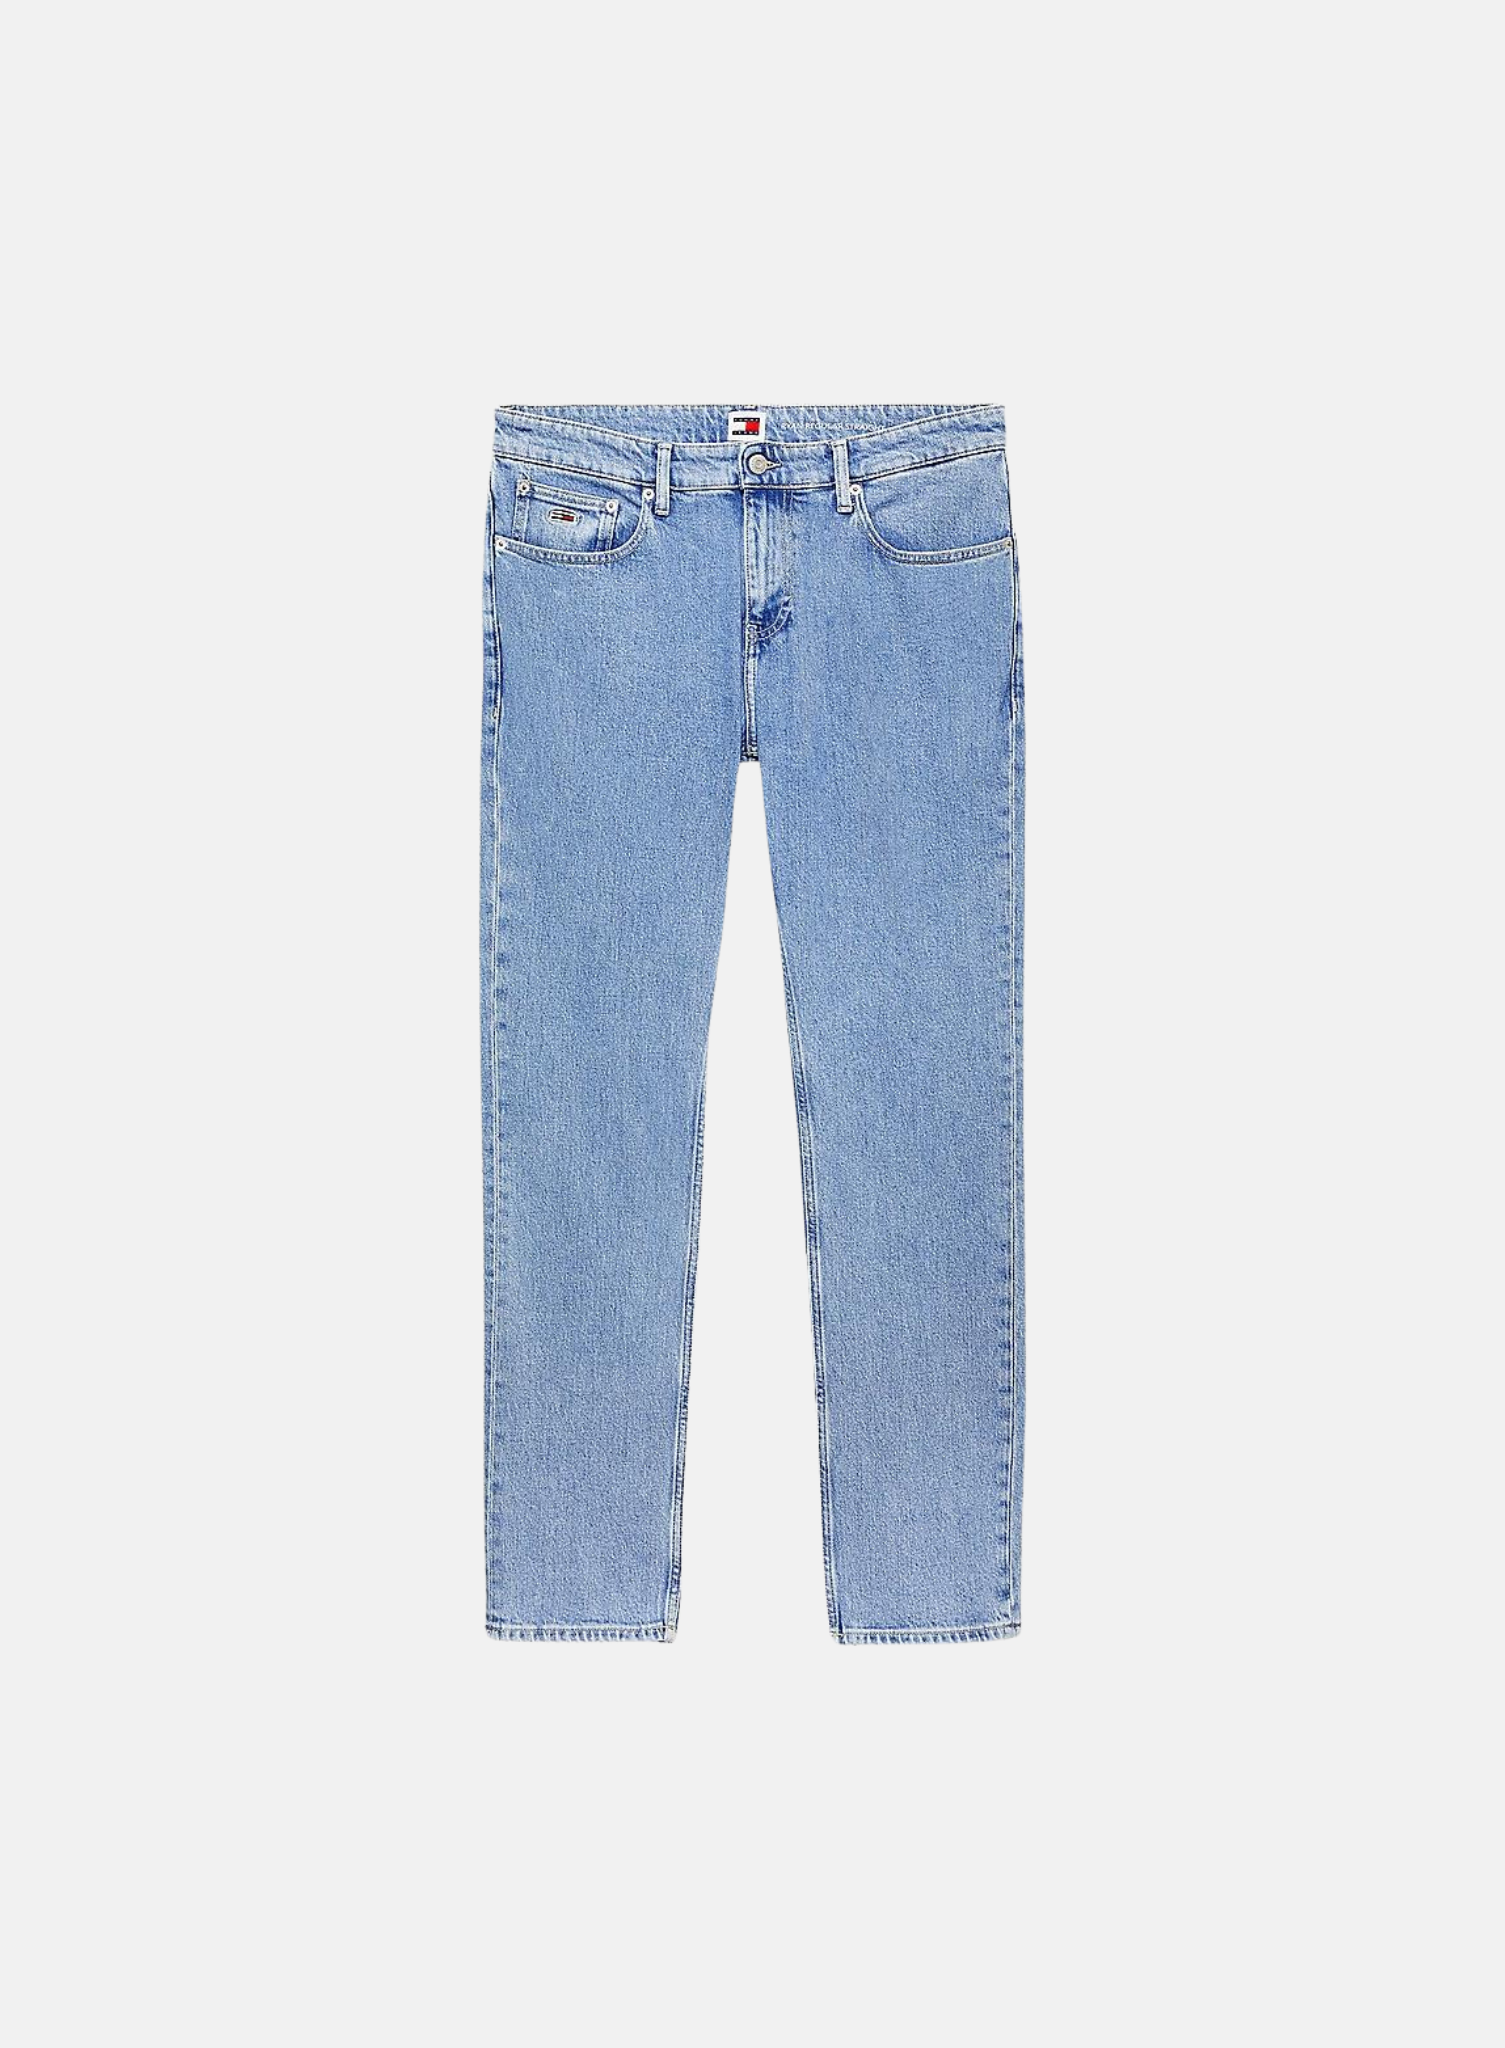 Tommy Jeans Ryan Regular Straight Jeans - Hympala Store 